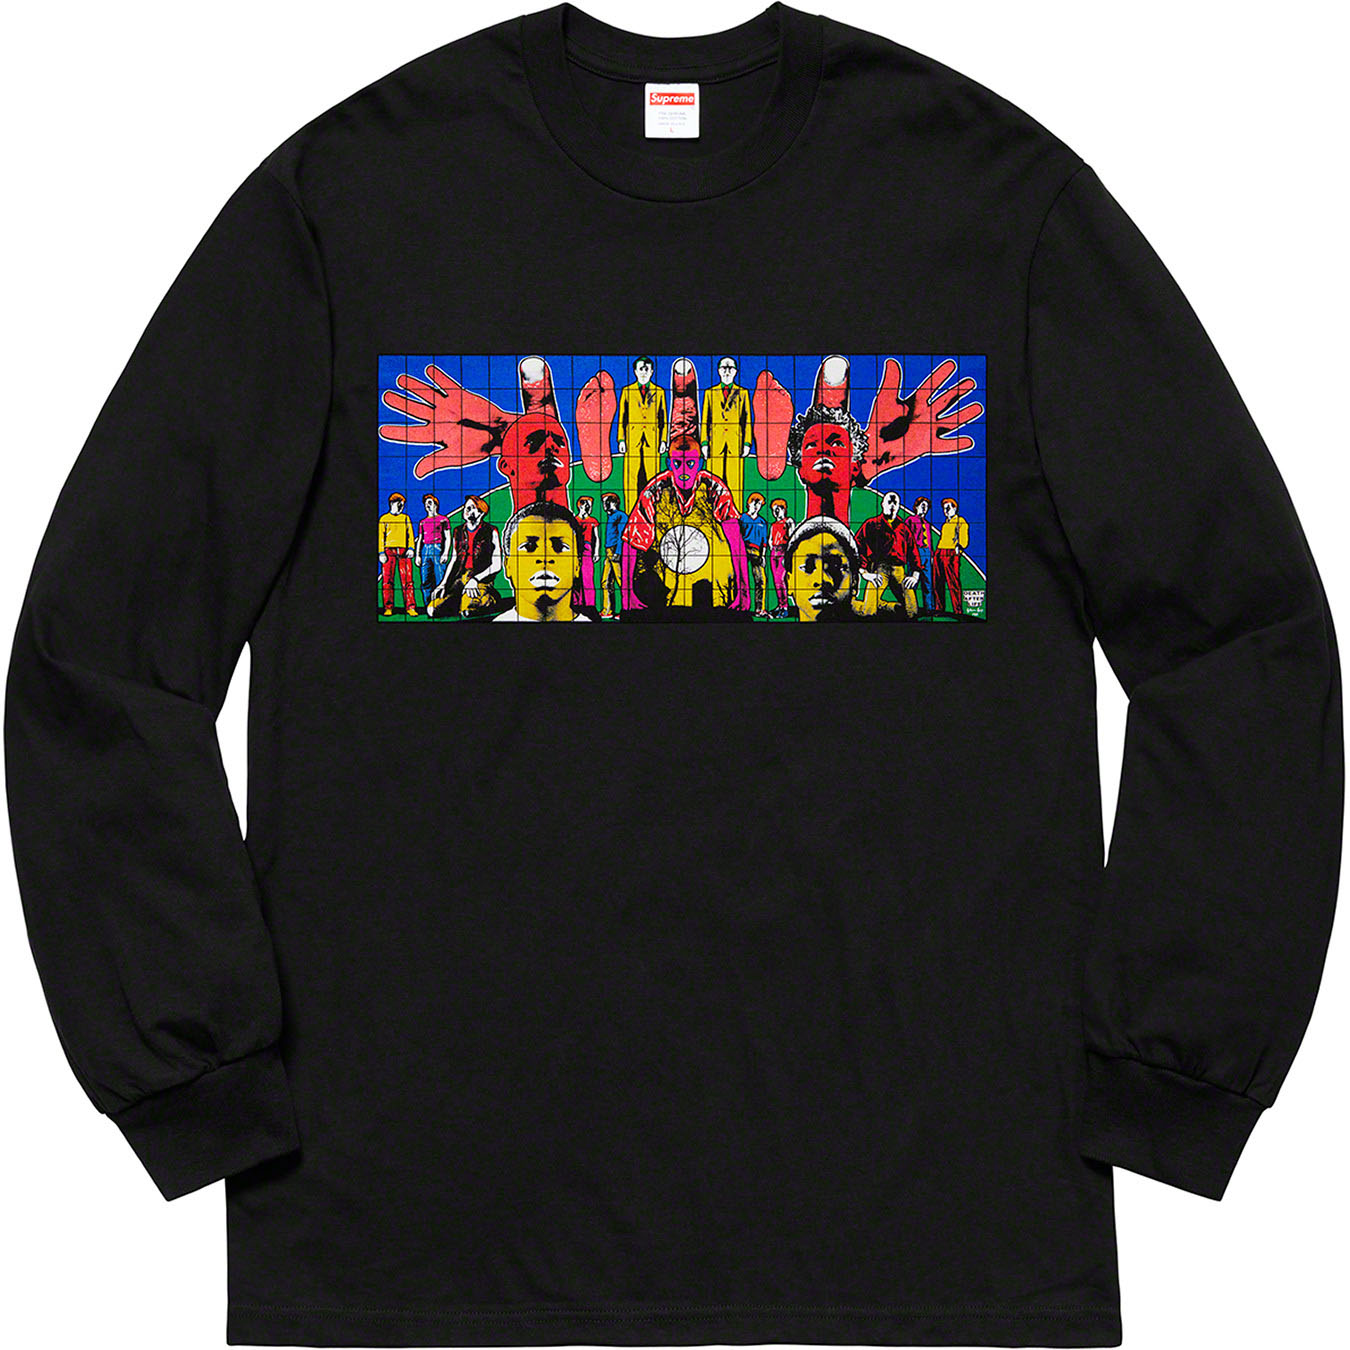 Gilbert & George/Supreme DEATH AFTER LIFE L/S Tee | Supreme 19ss